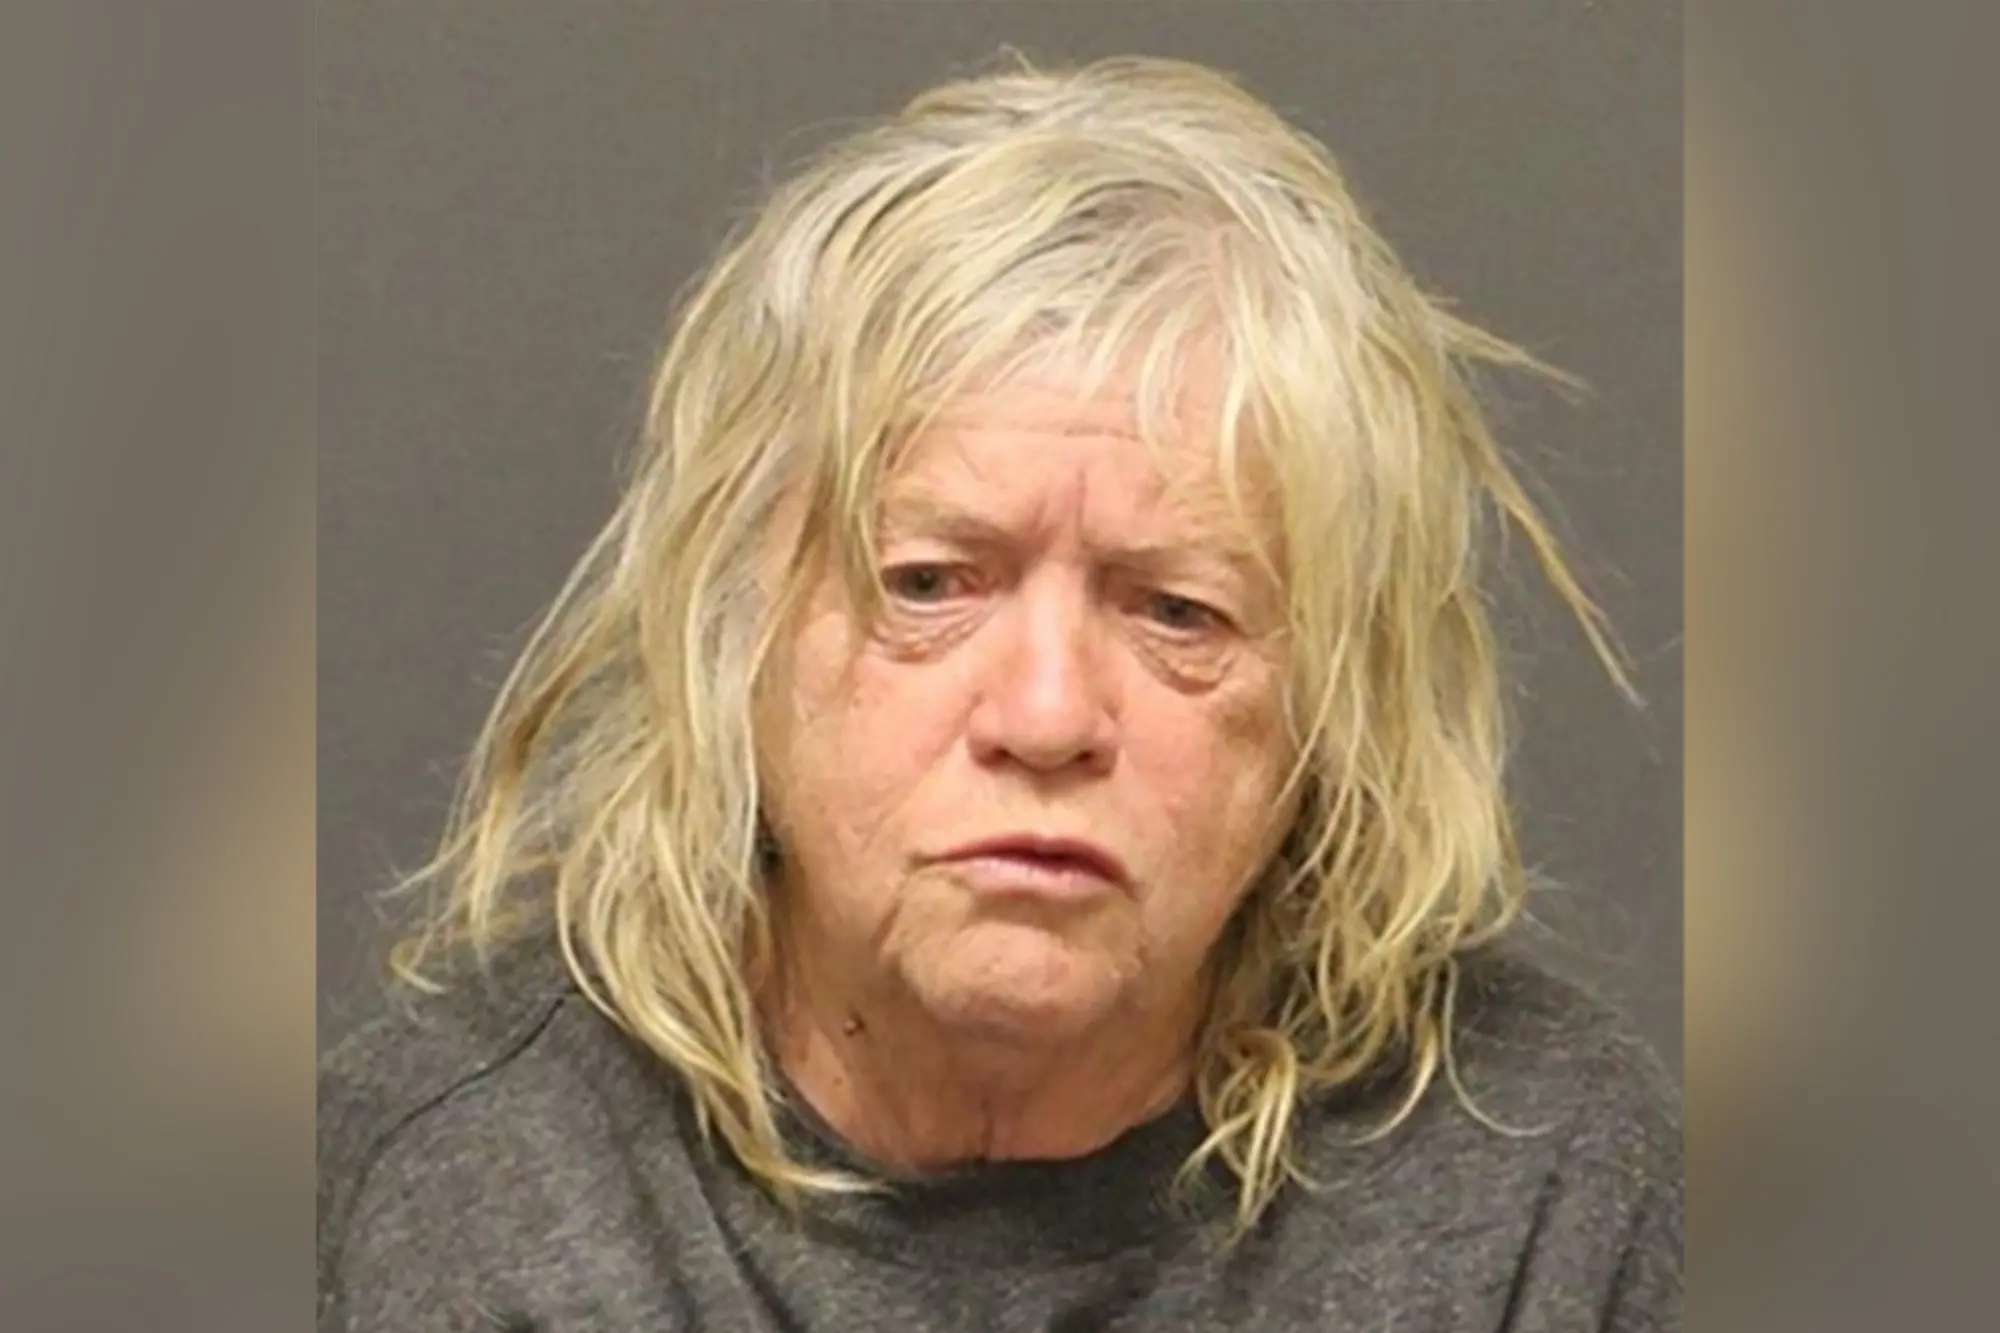 Urine, Feces, and Trash, Found In Arizona Woman's Home Leading Her Faced With 43 Counts Of Animal Cruelty, Police Say (New York Post)